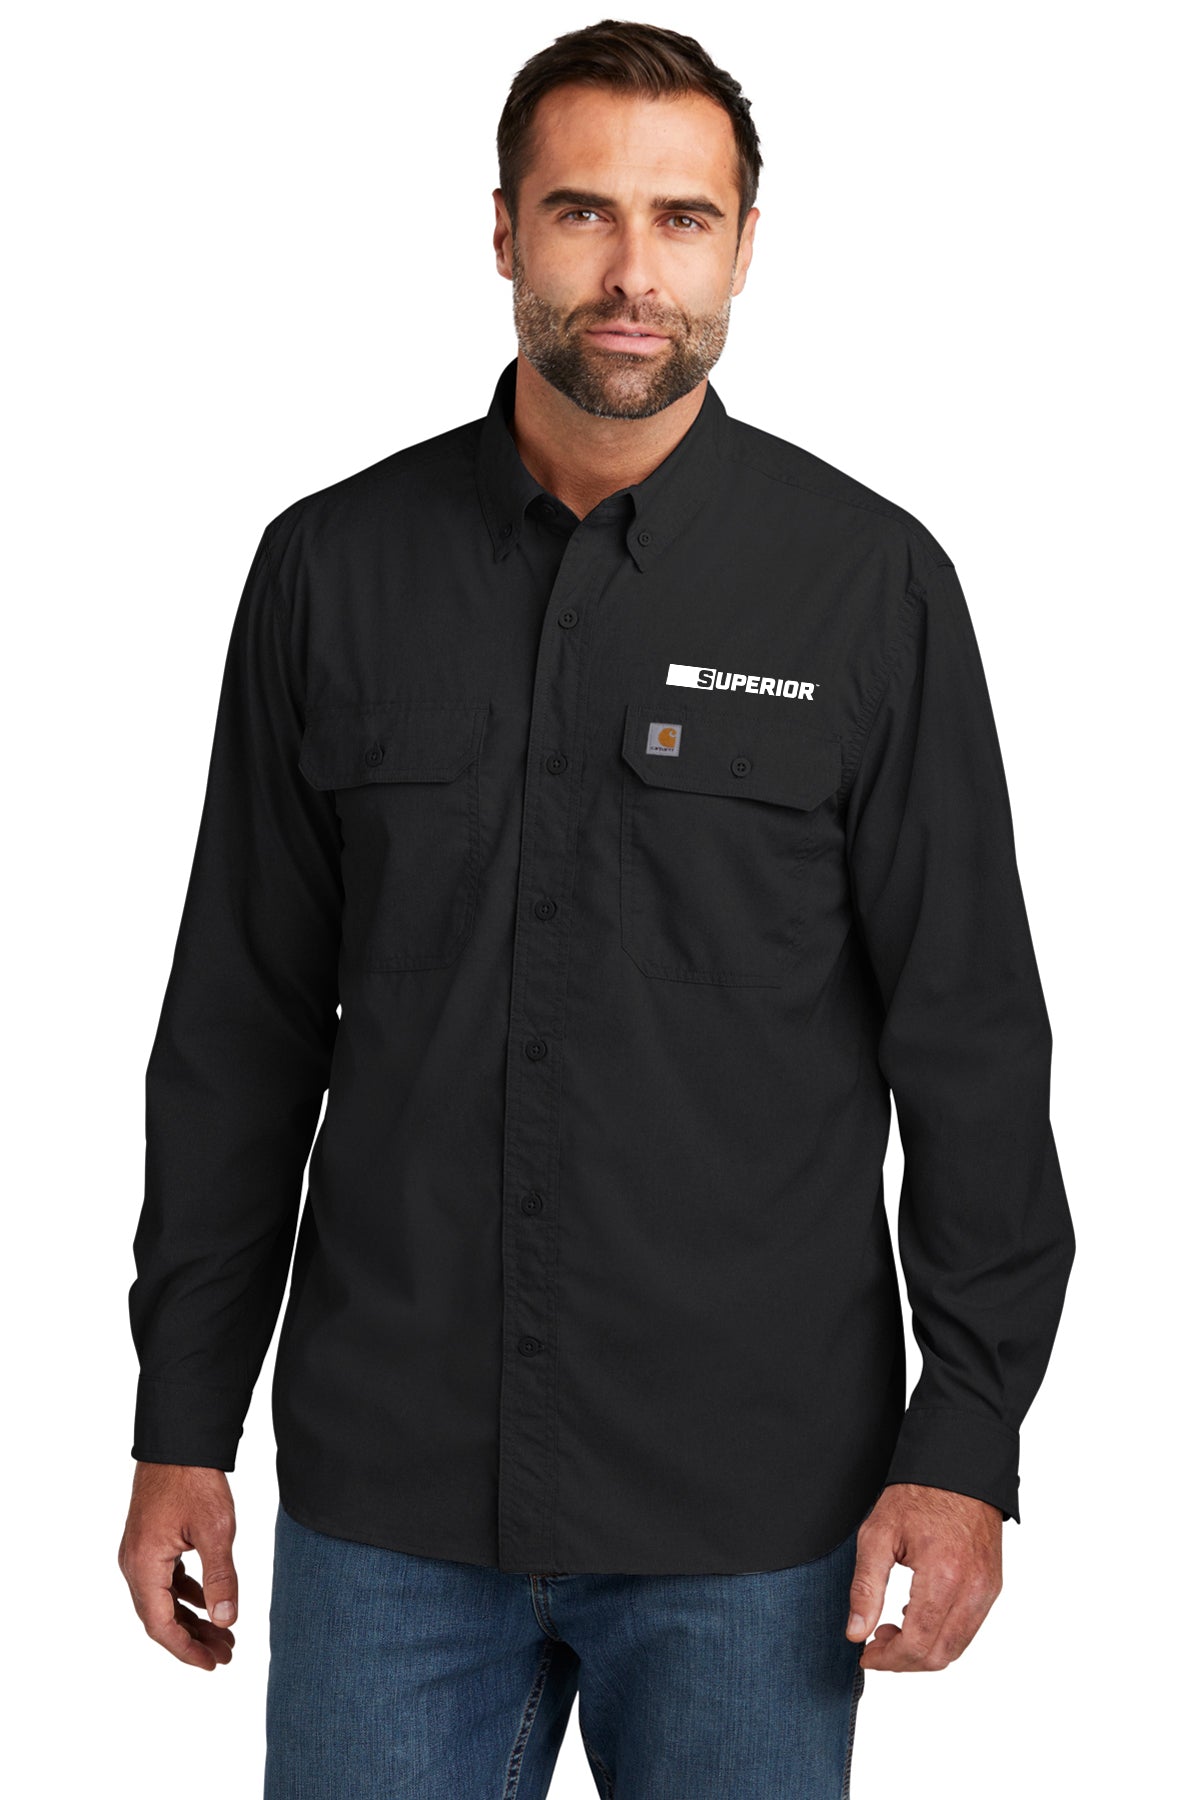 Carhartt Force® Solid Long Sleeve Shirt - SuperiorConstructionSwag